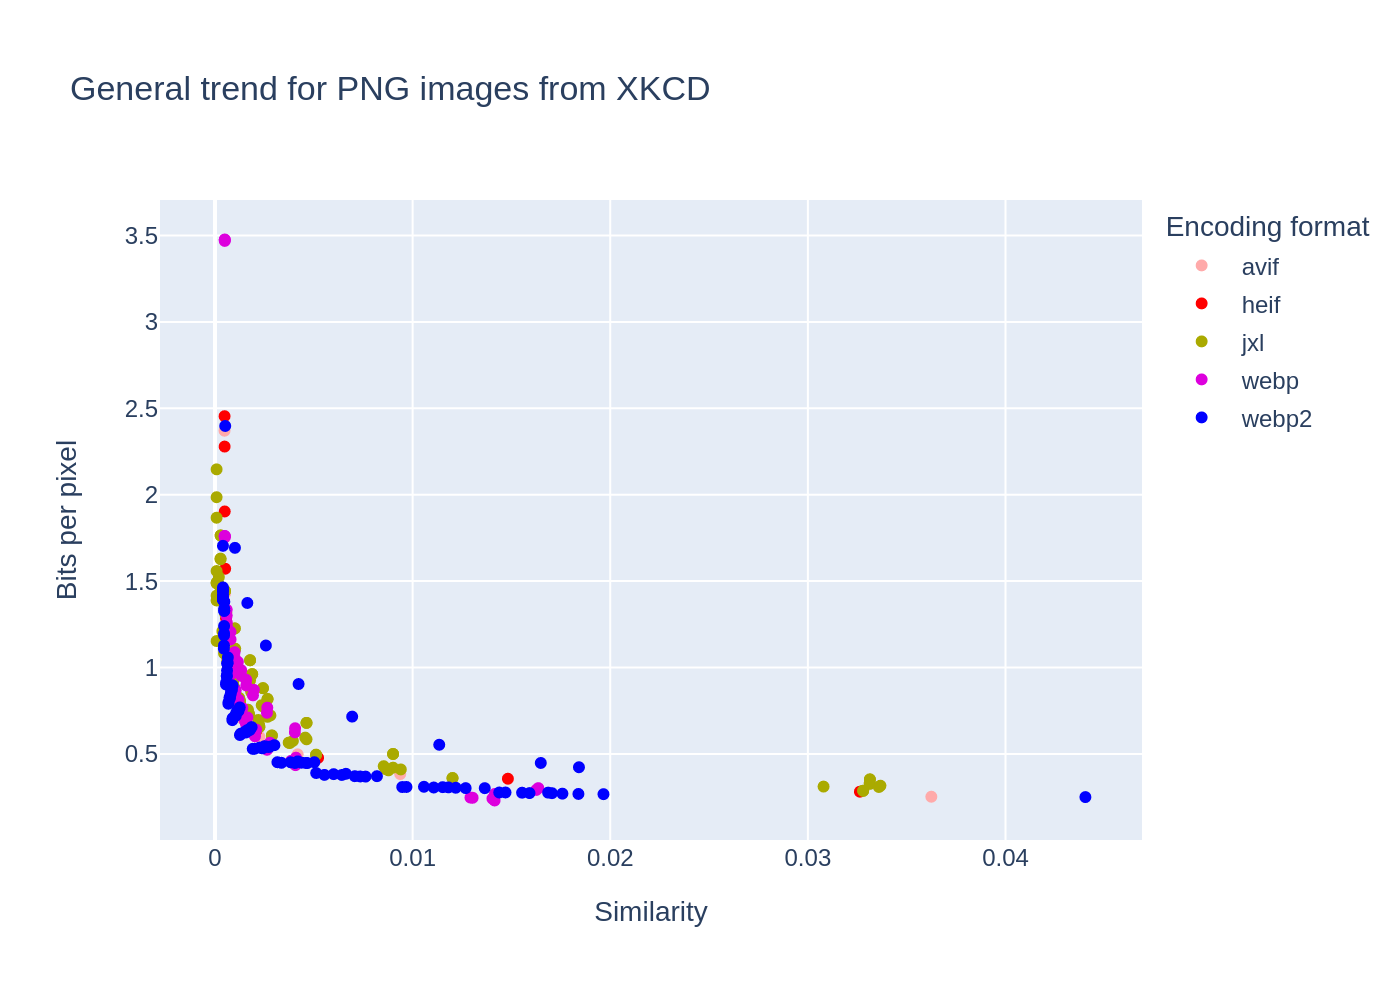 General trend in PNGs from XKCD, compression ratio as a function of quality for different image formats